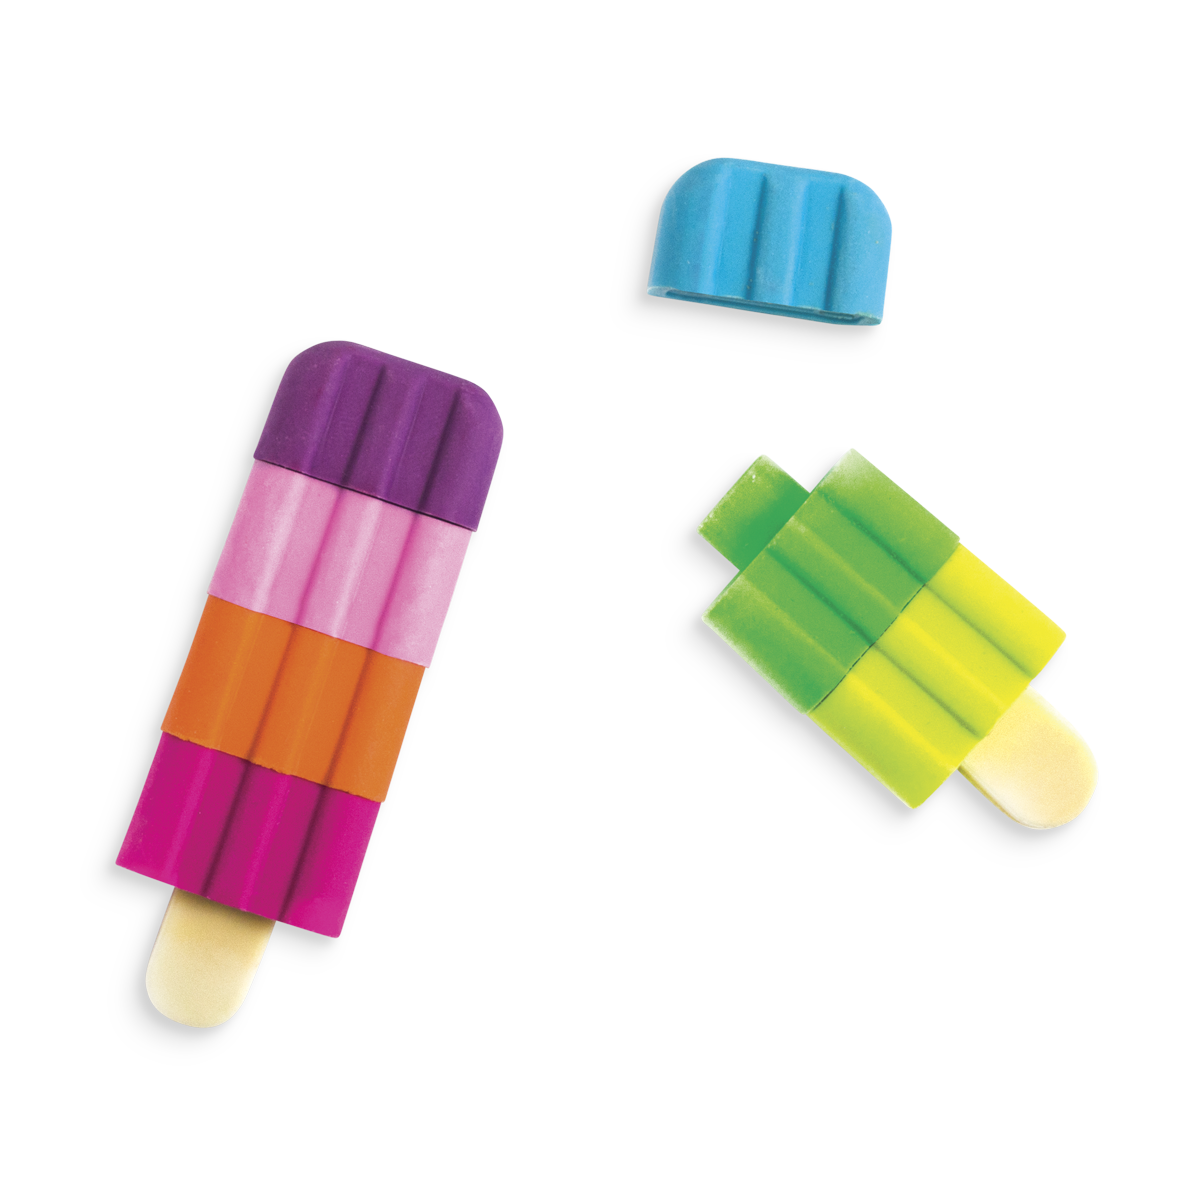 2 Icy Pop pencil erasers with mix and match colors